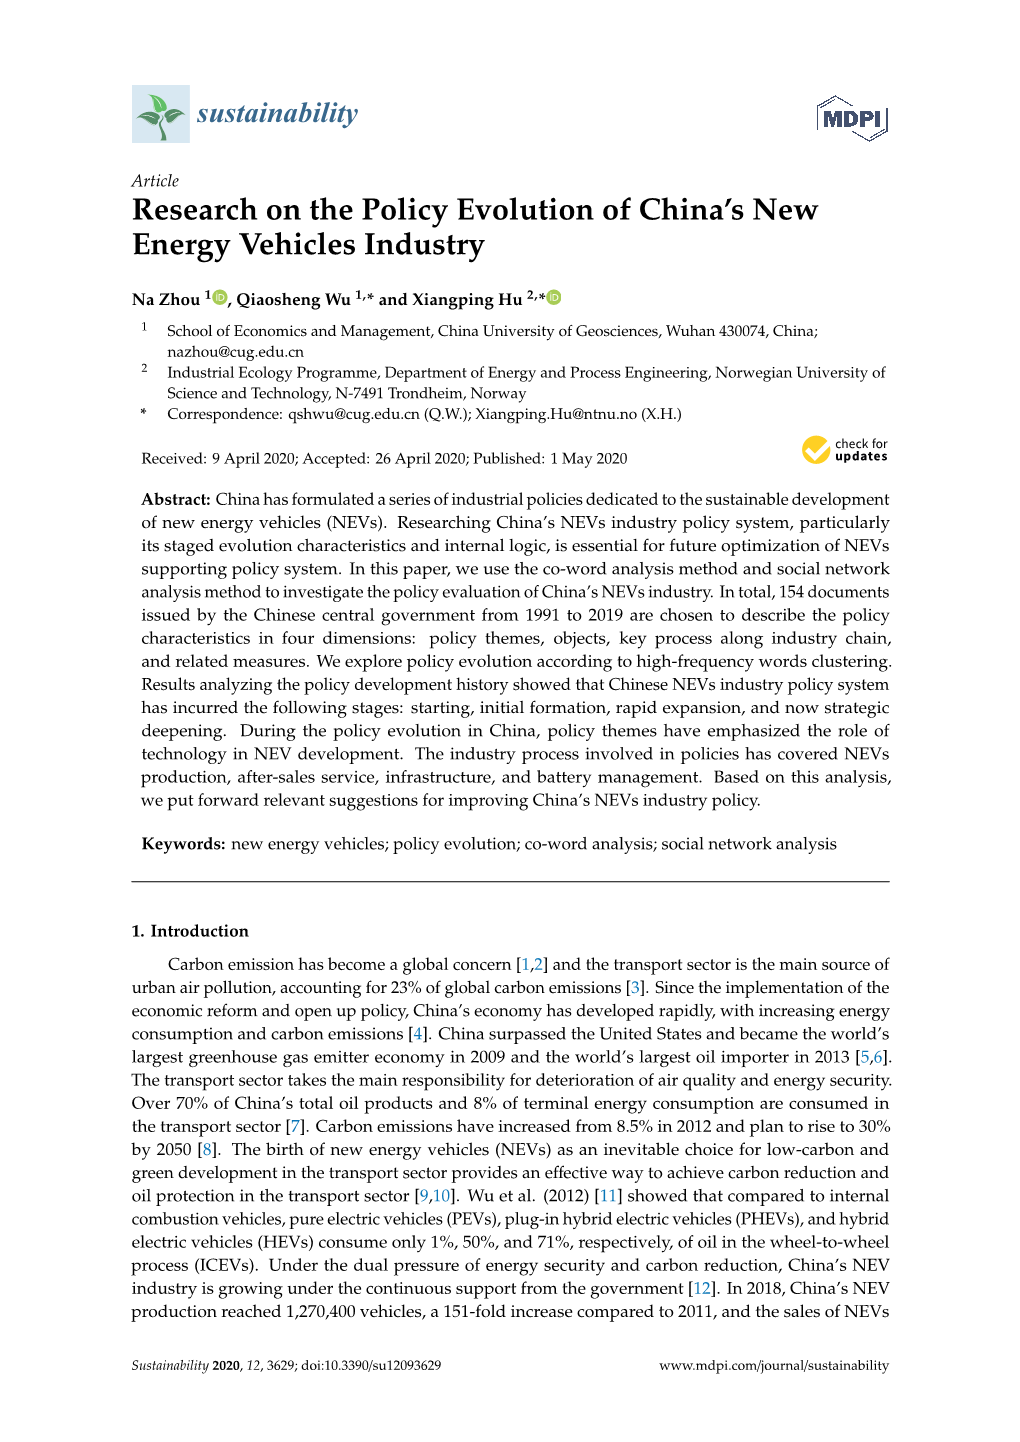 Research on the Policy Evolution of China's New Energy Vehicles Industry